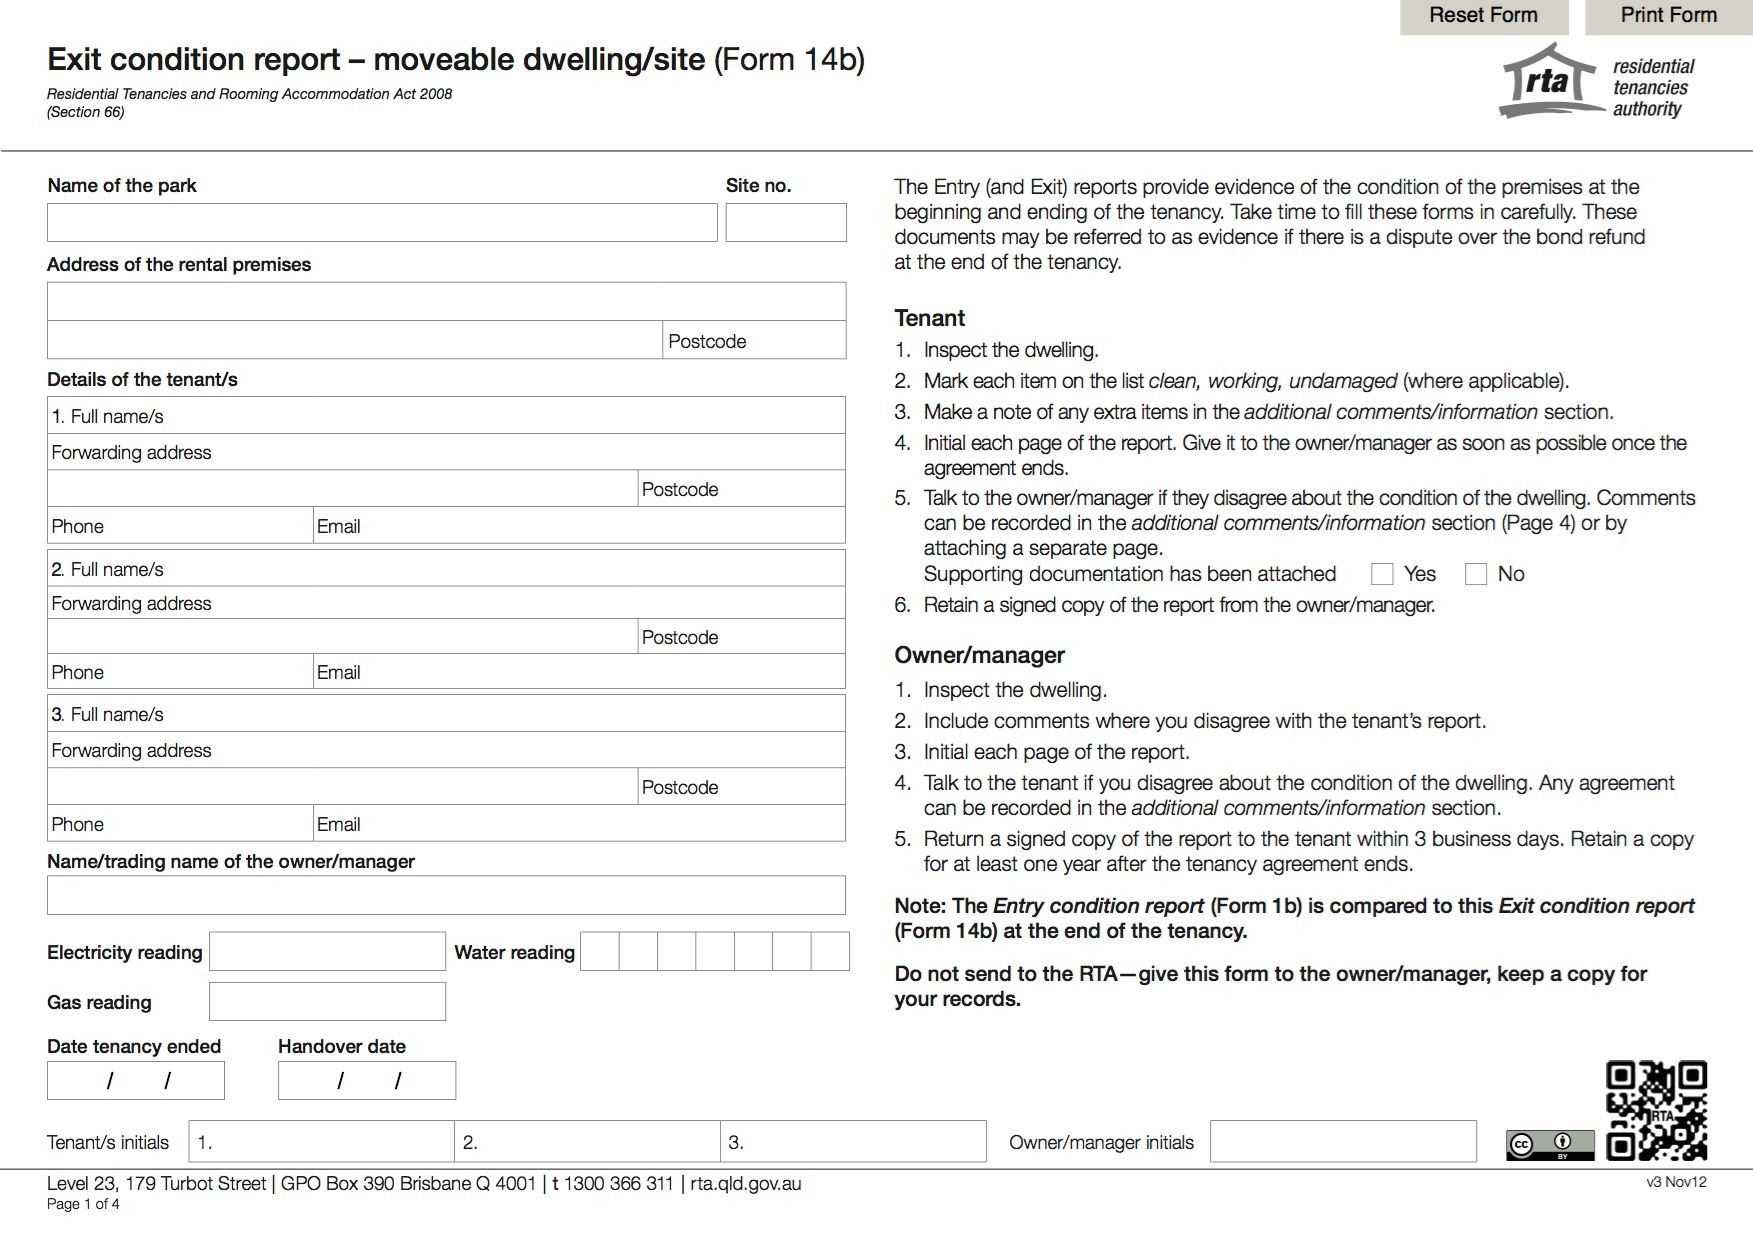 Incident Report Form Template Qld ] - Michael Smith News 17 In Incident Report Form Template Qld